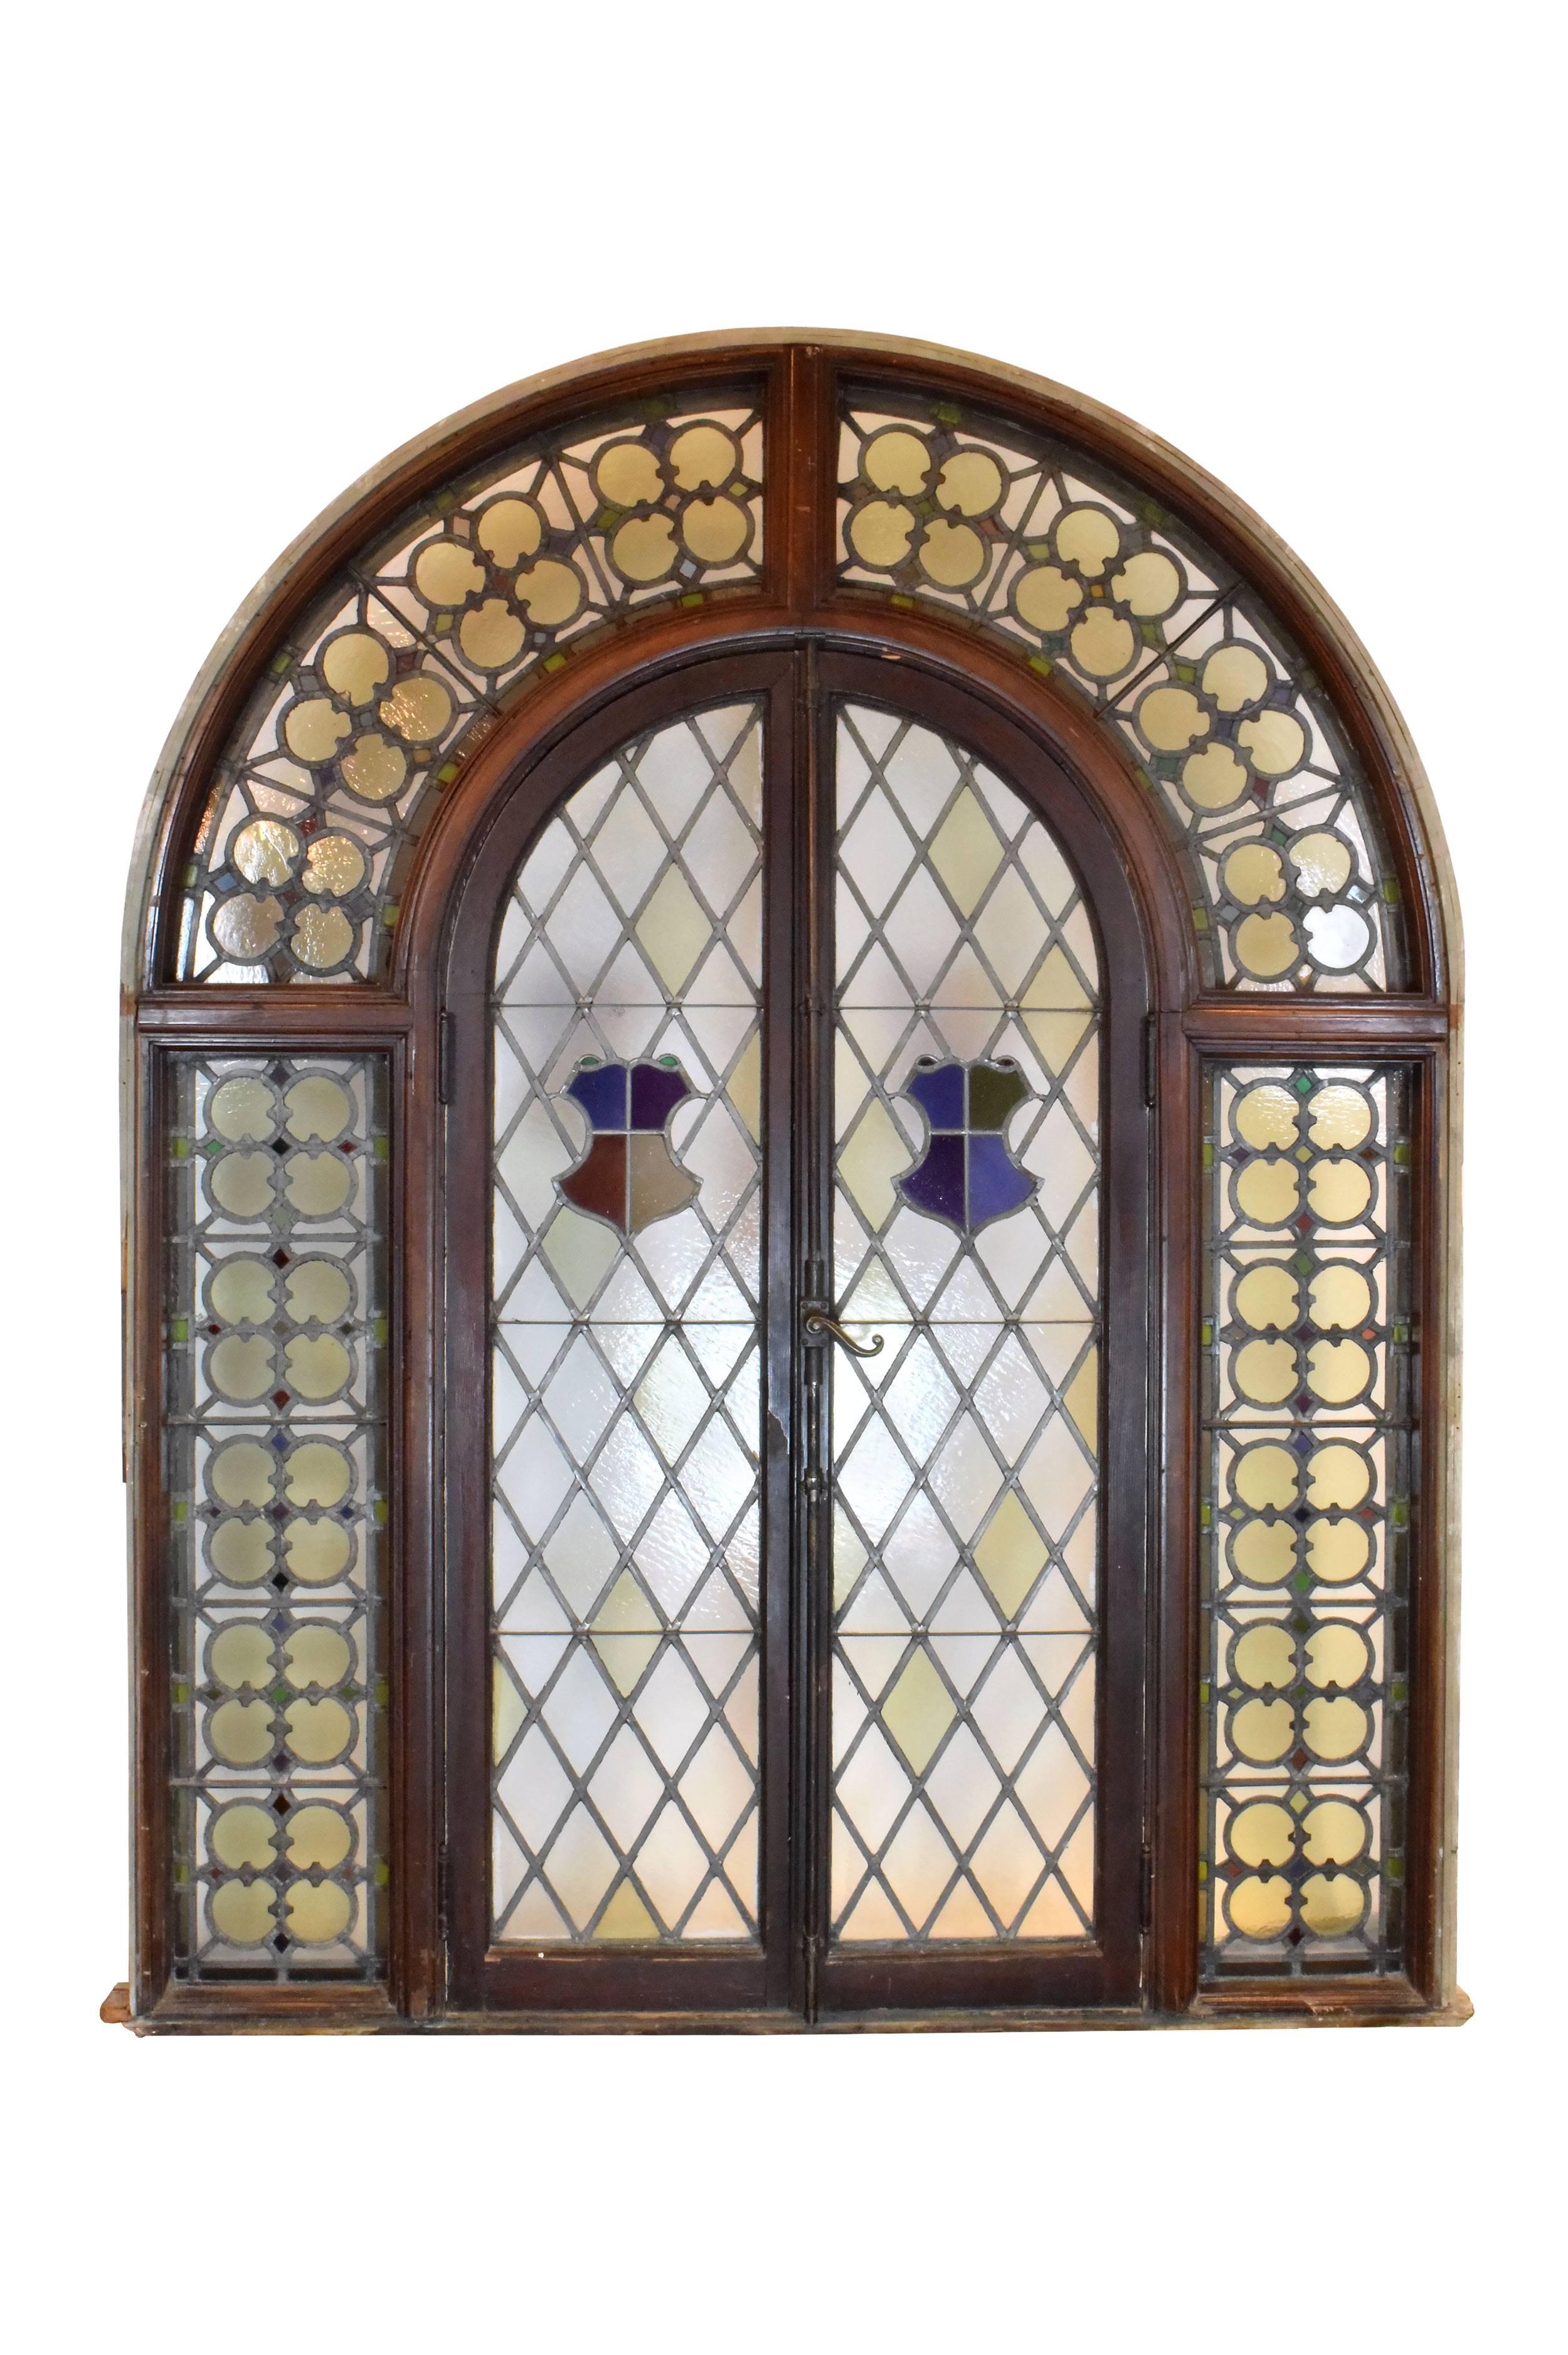 This gorgeous arched French window unit features colorful stained glass details throughout and decorative metal latticework running across the glass. A smaller window within the unit unlatches with a beautiful brass cremone bolt. Richly stained wood